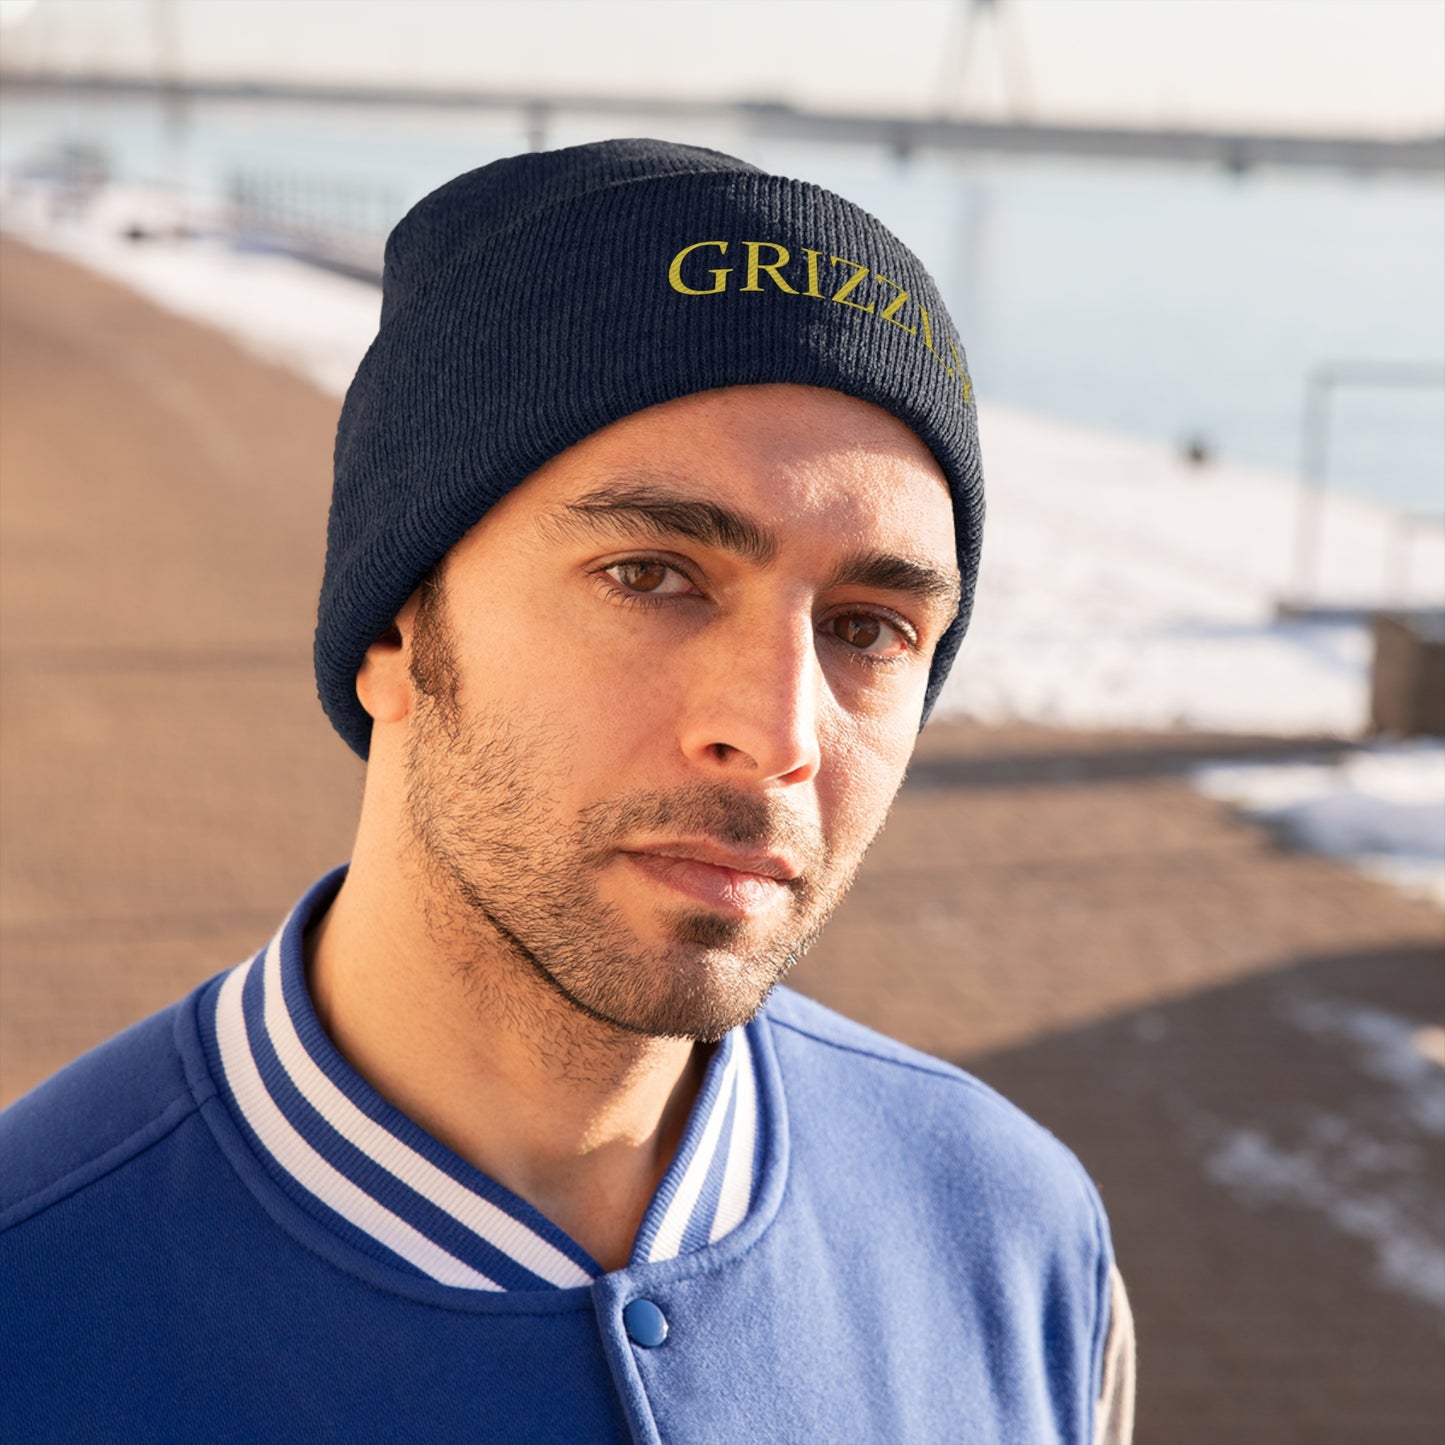 GGC "Grizzly" Knit Beanie - Gold Font